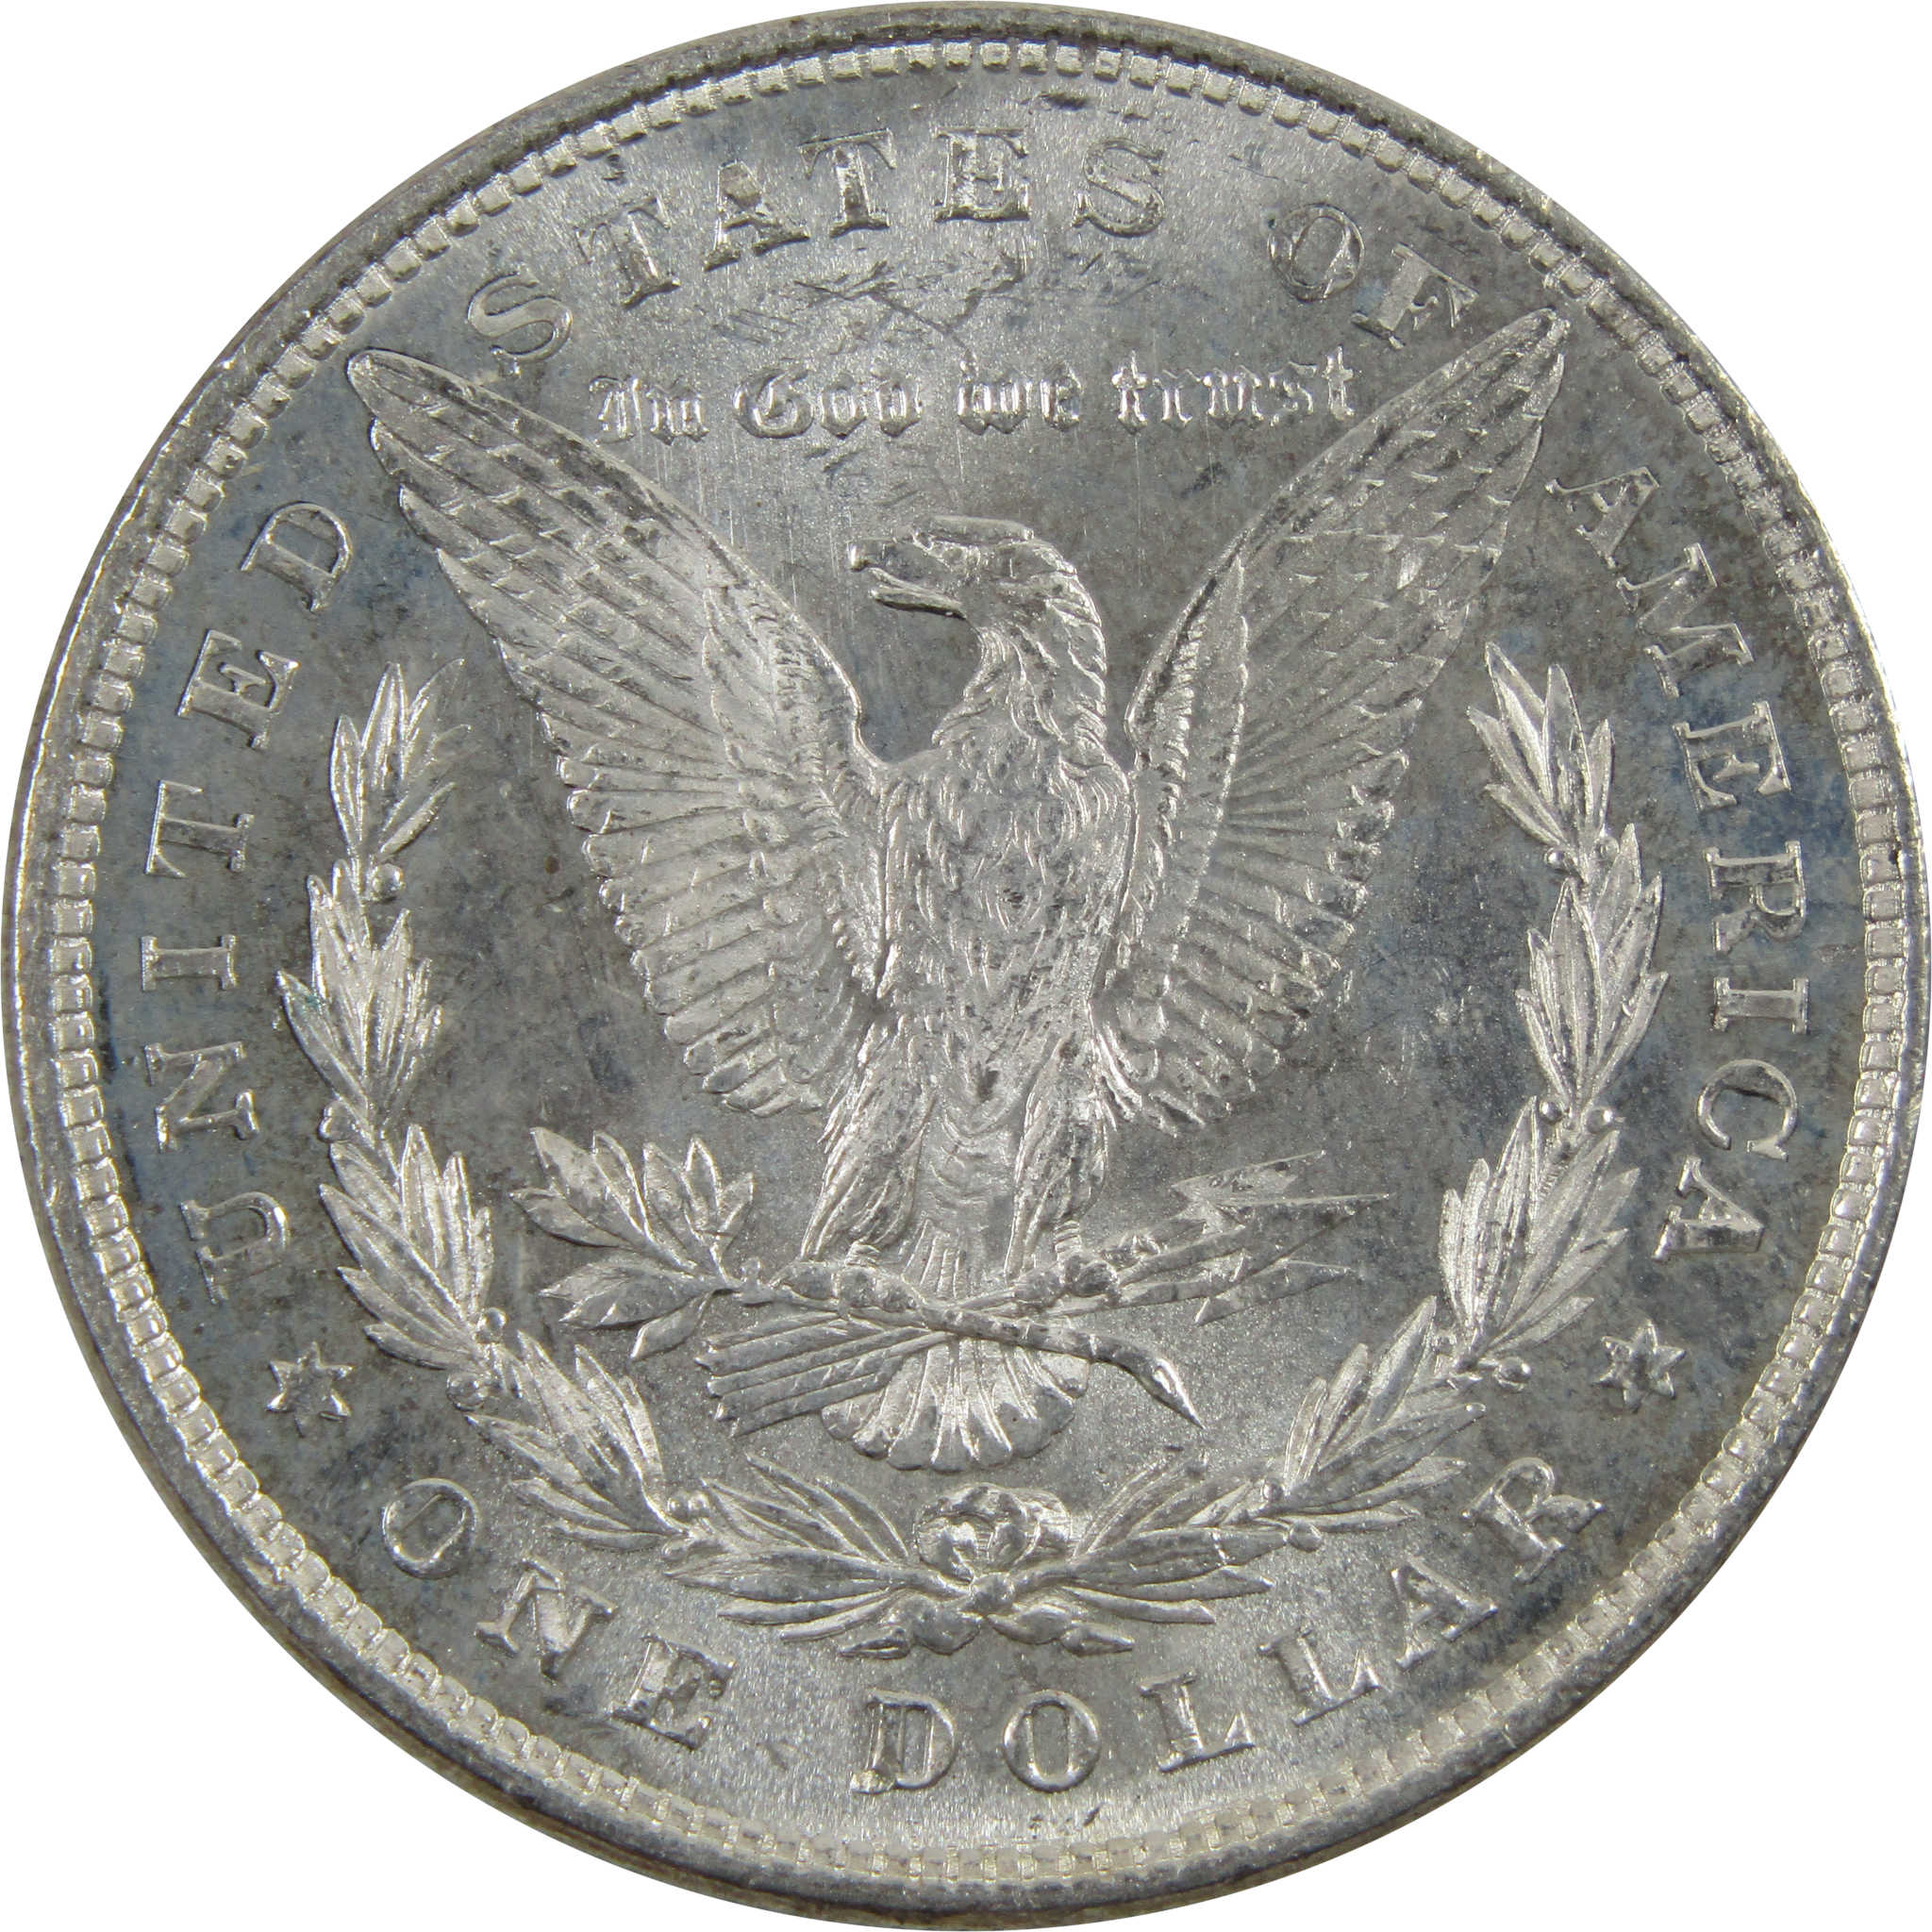 1878 8TF Morgan Dollar Uncirculated Details 90% Silver $1 SKU:I4942 - Morgan coin - Morgan silver dollar - Morgan silver dollar for sale - Profile Coins &amp; Collectibles